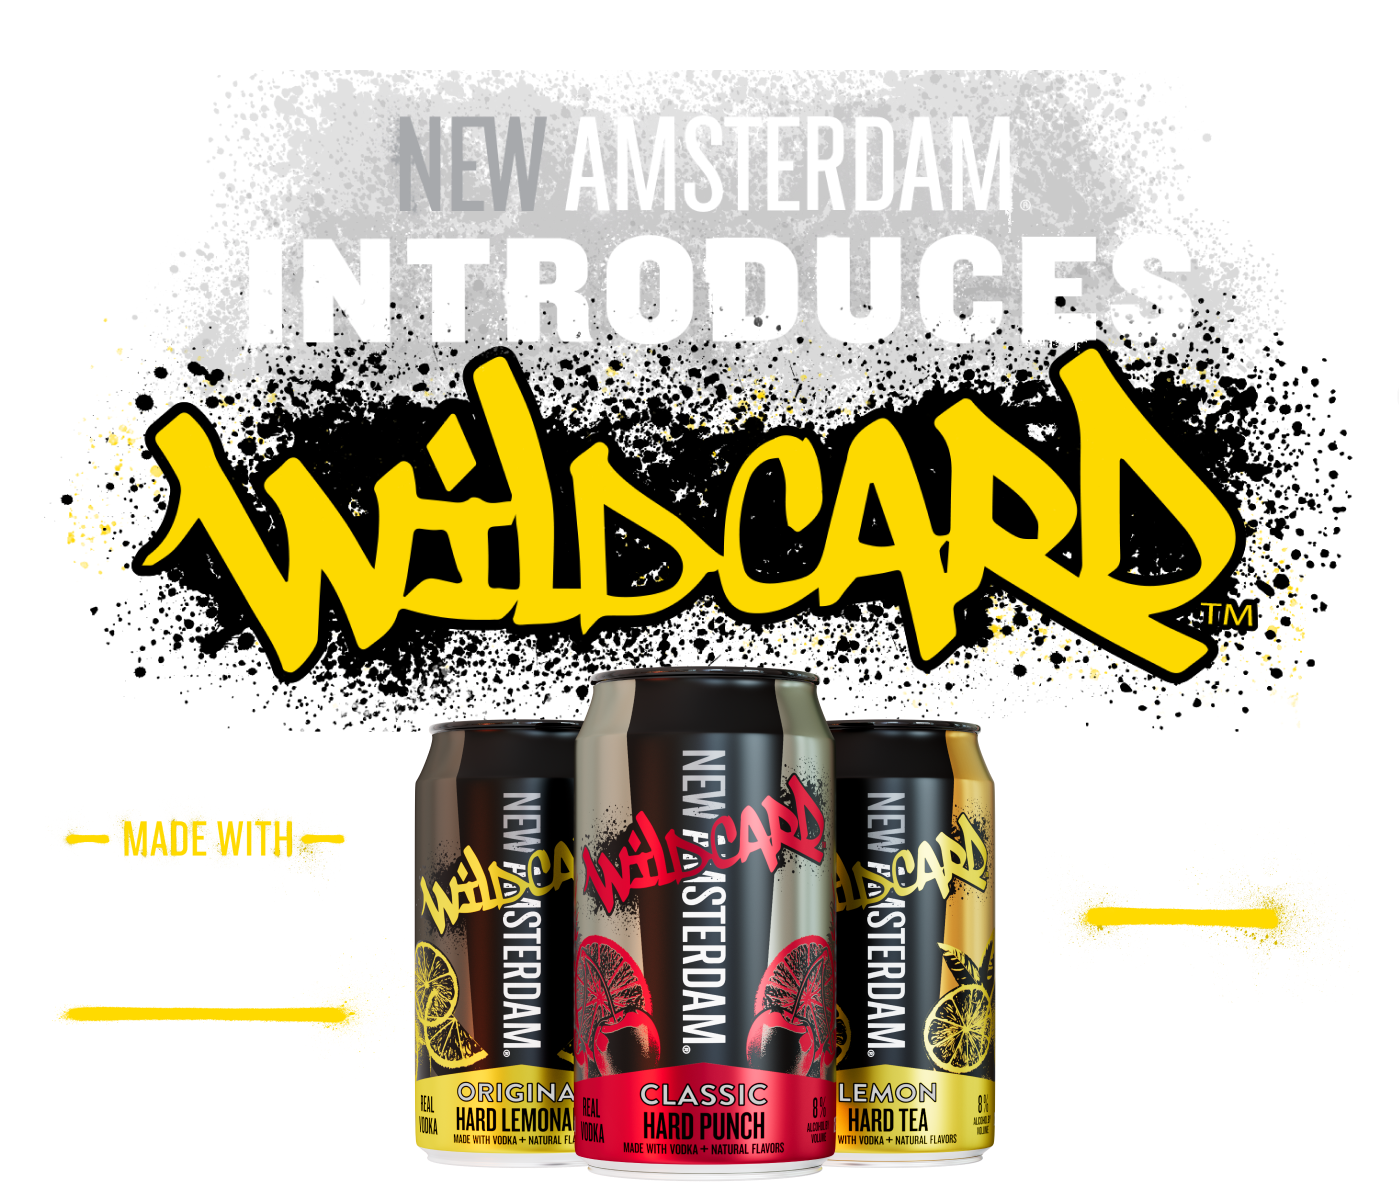 New Amsterdam Introduces Wild Card.  Made with real vodka. 8% ABV.